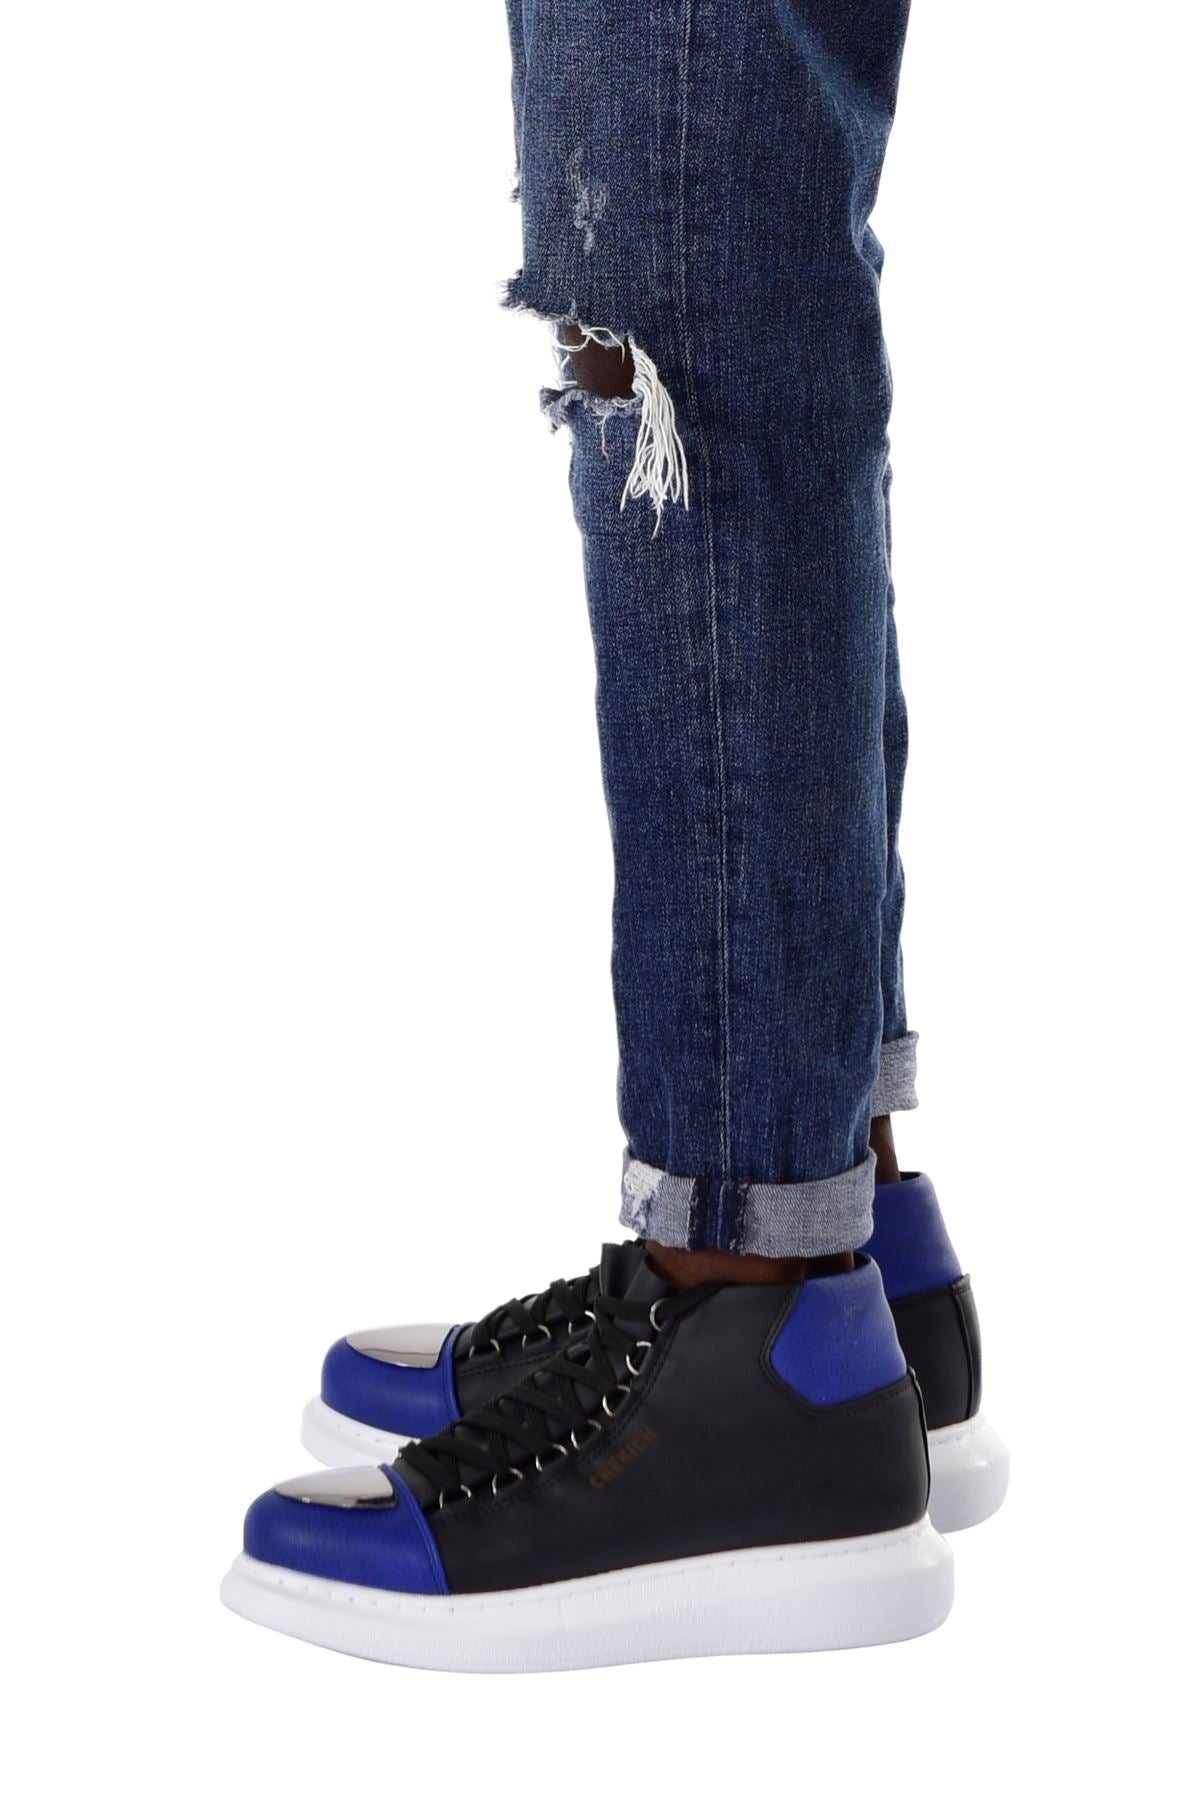 CH267 BT Men's Shoes sneakers Boots BLACK/SAX BLUE - STREETMODE ™